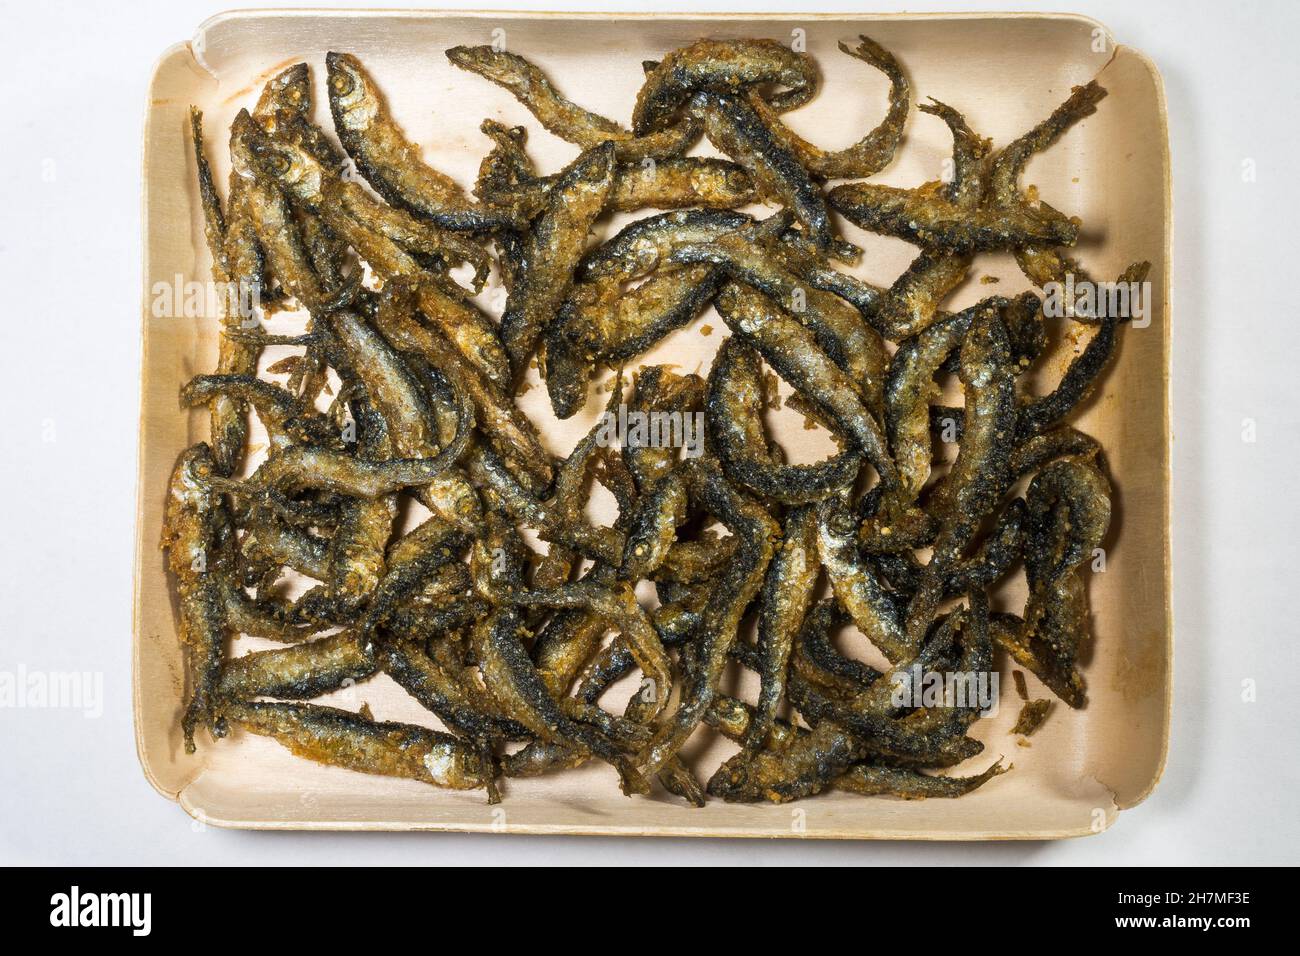 Fried and battered small Vendace fish (Coregonus albula) in a tray Stock Photo